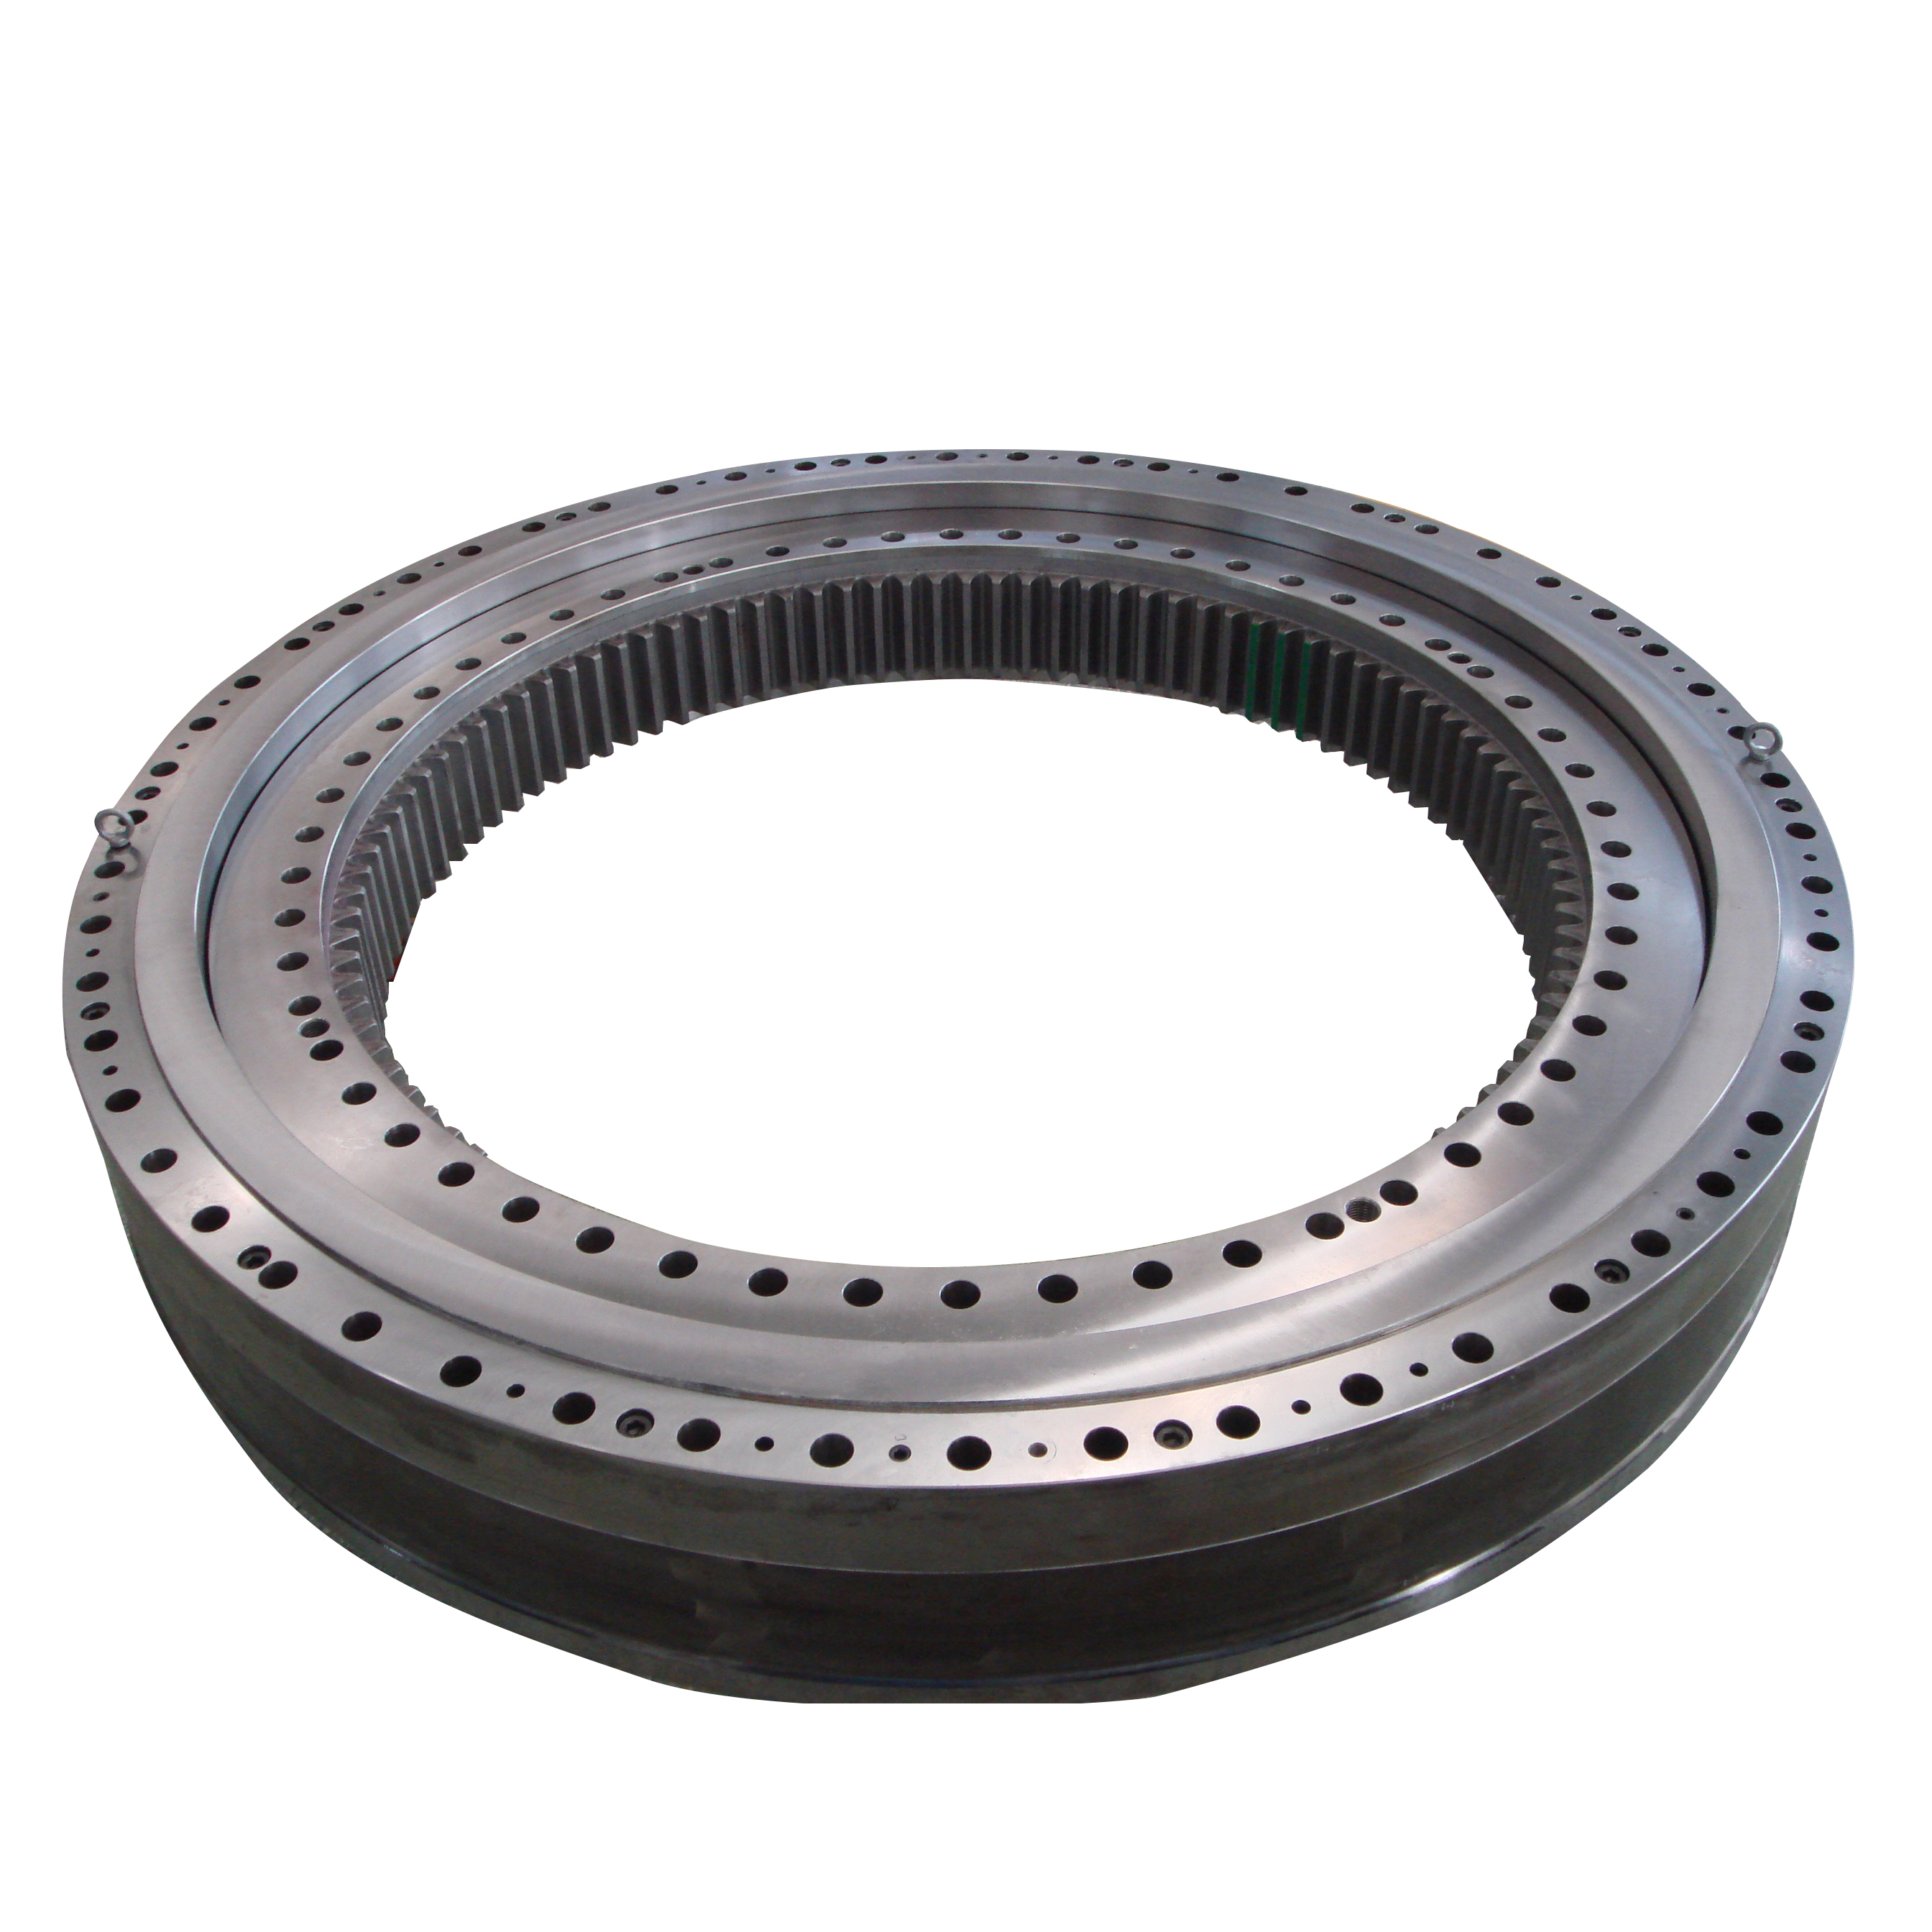 High Quality OEM Slewing Bearings Applied For Tunnel Engineering